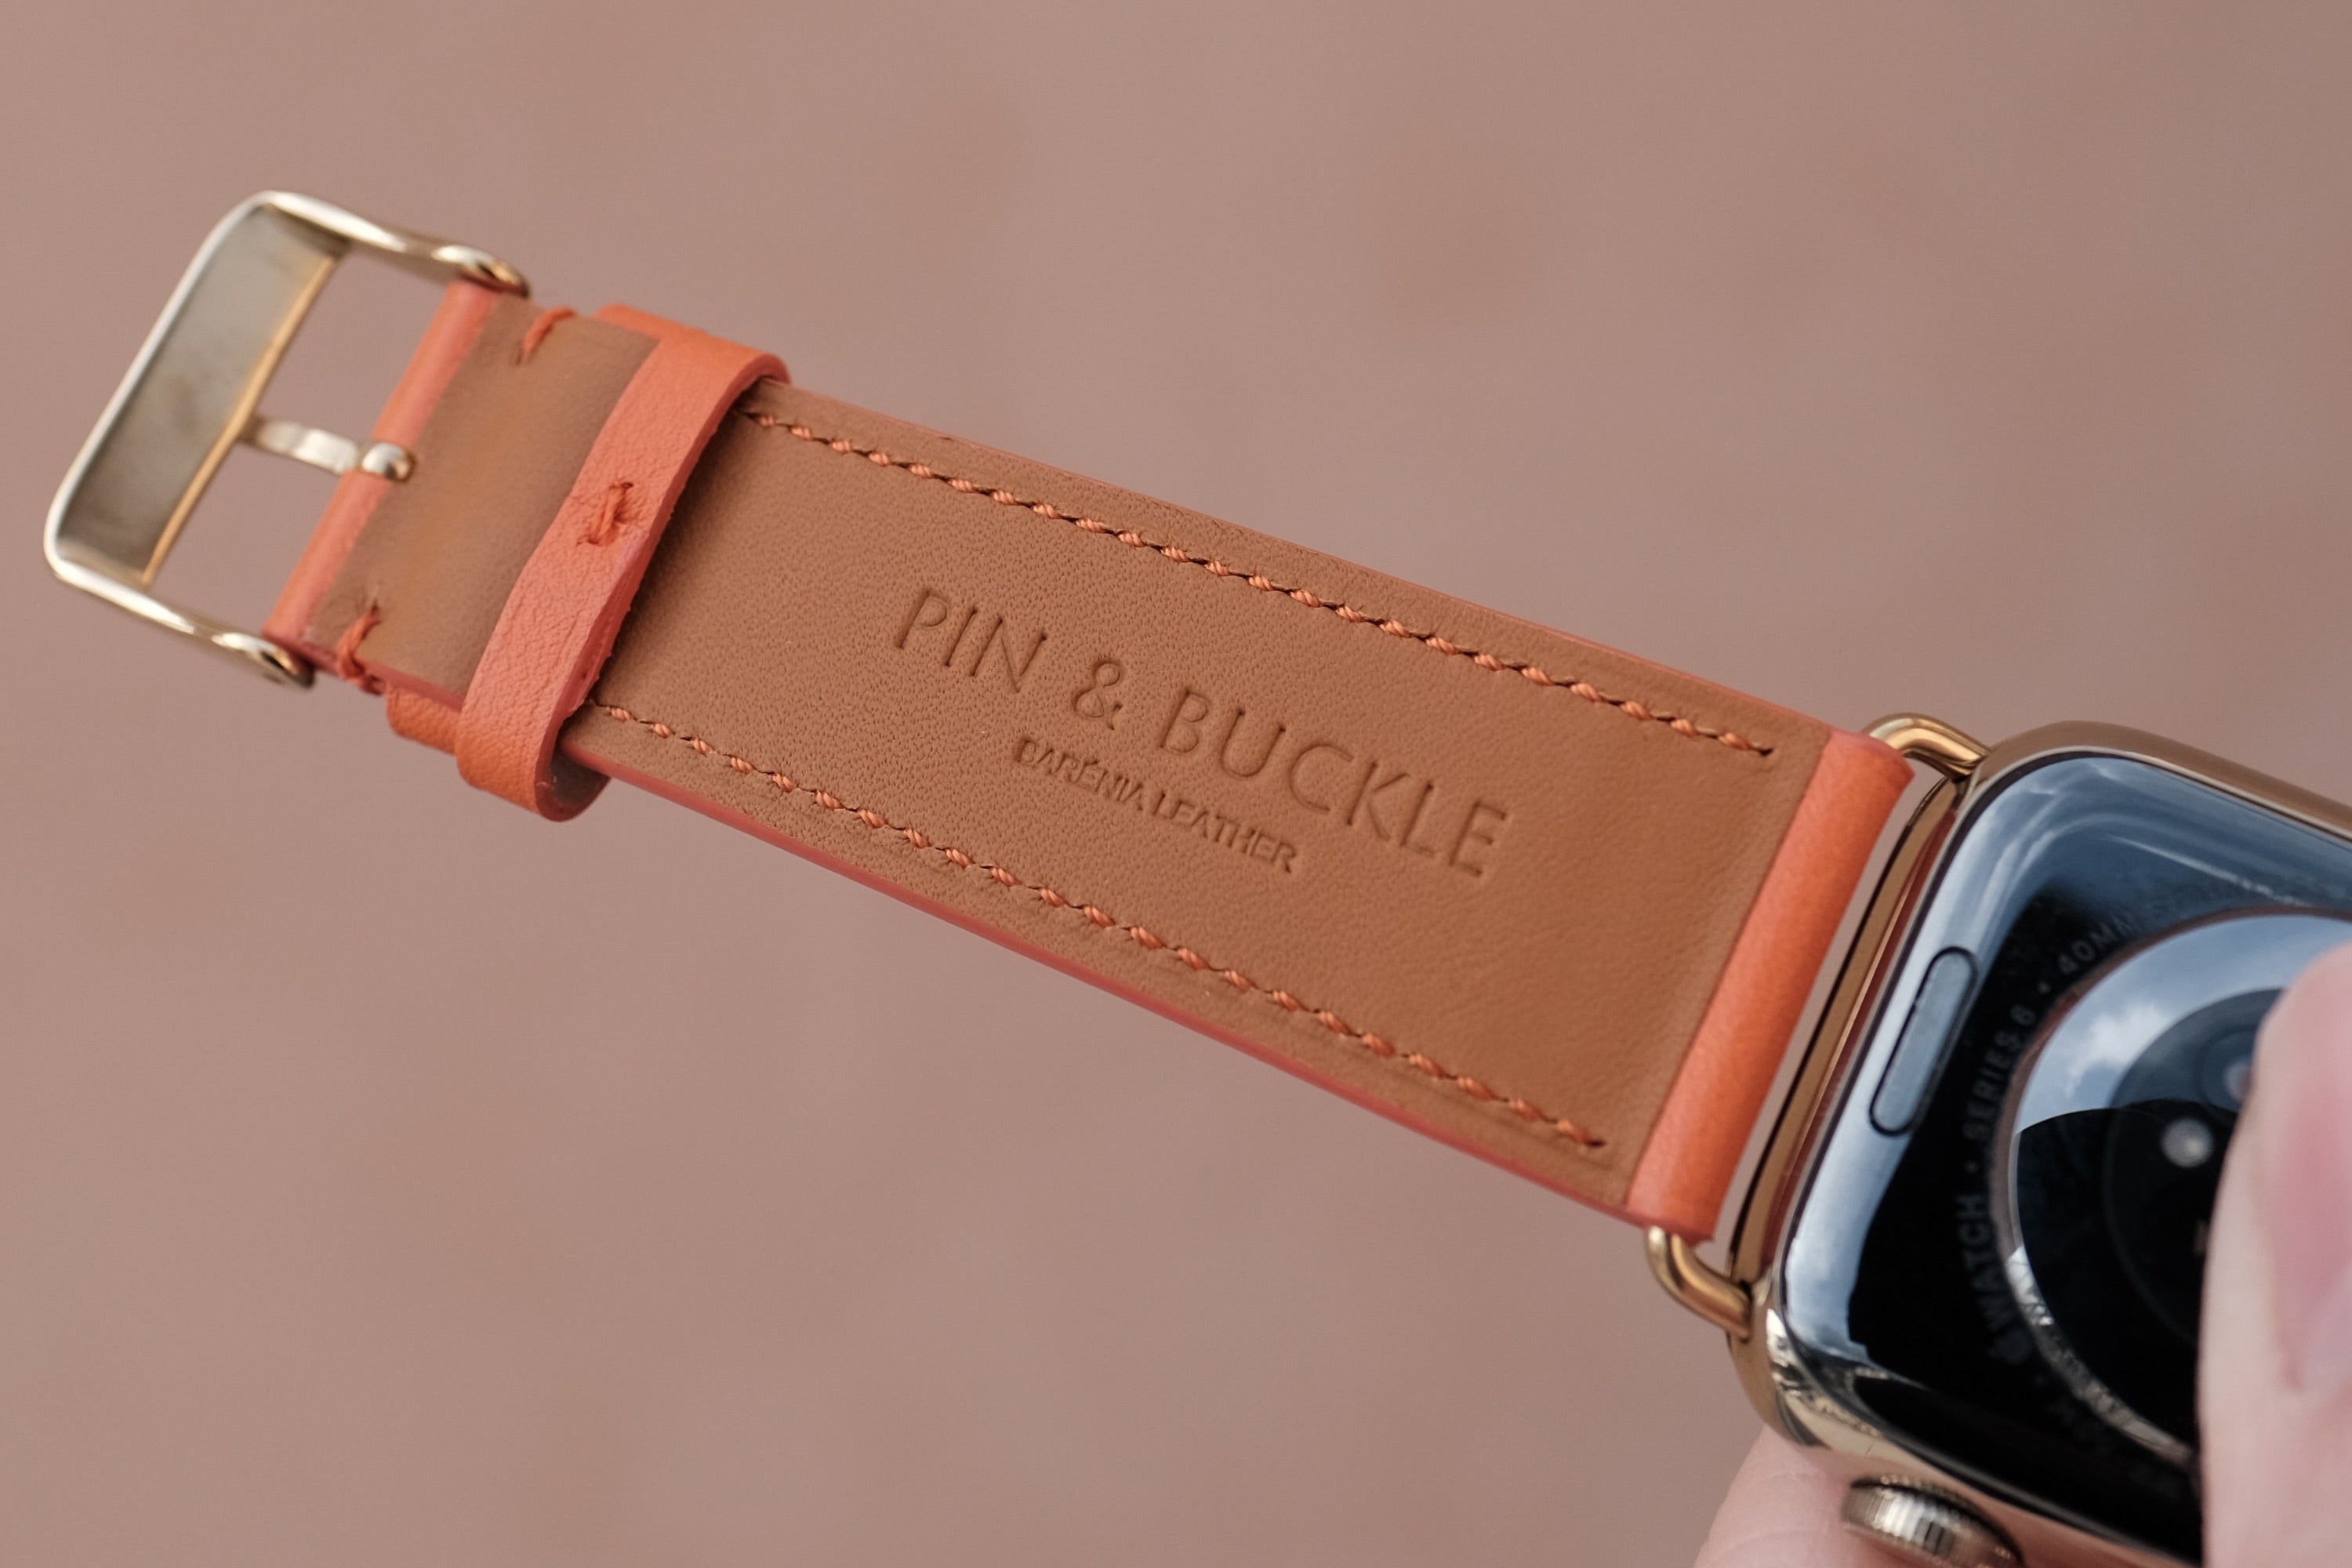 Barenia Leather Apple Watch Bands by Pin & Buckle - Mandarin